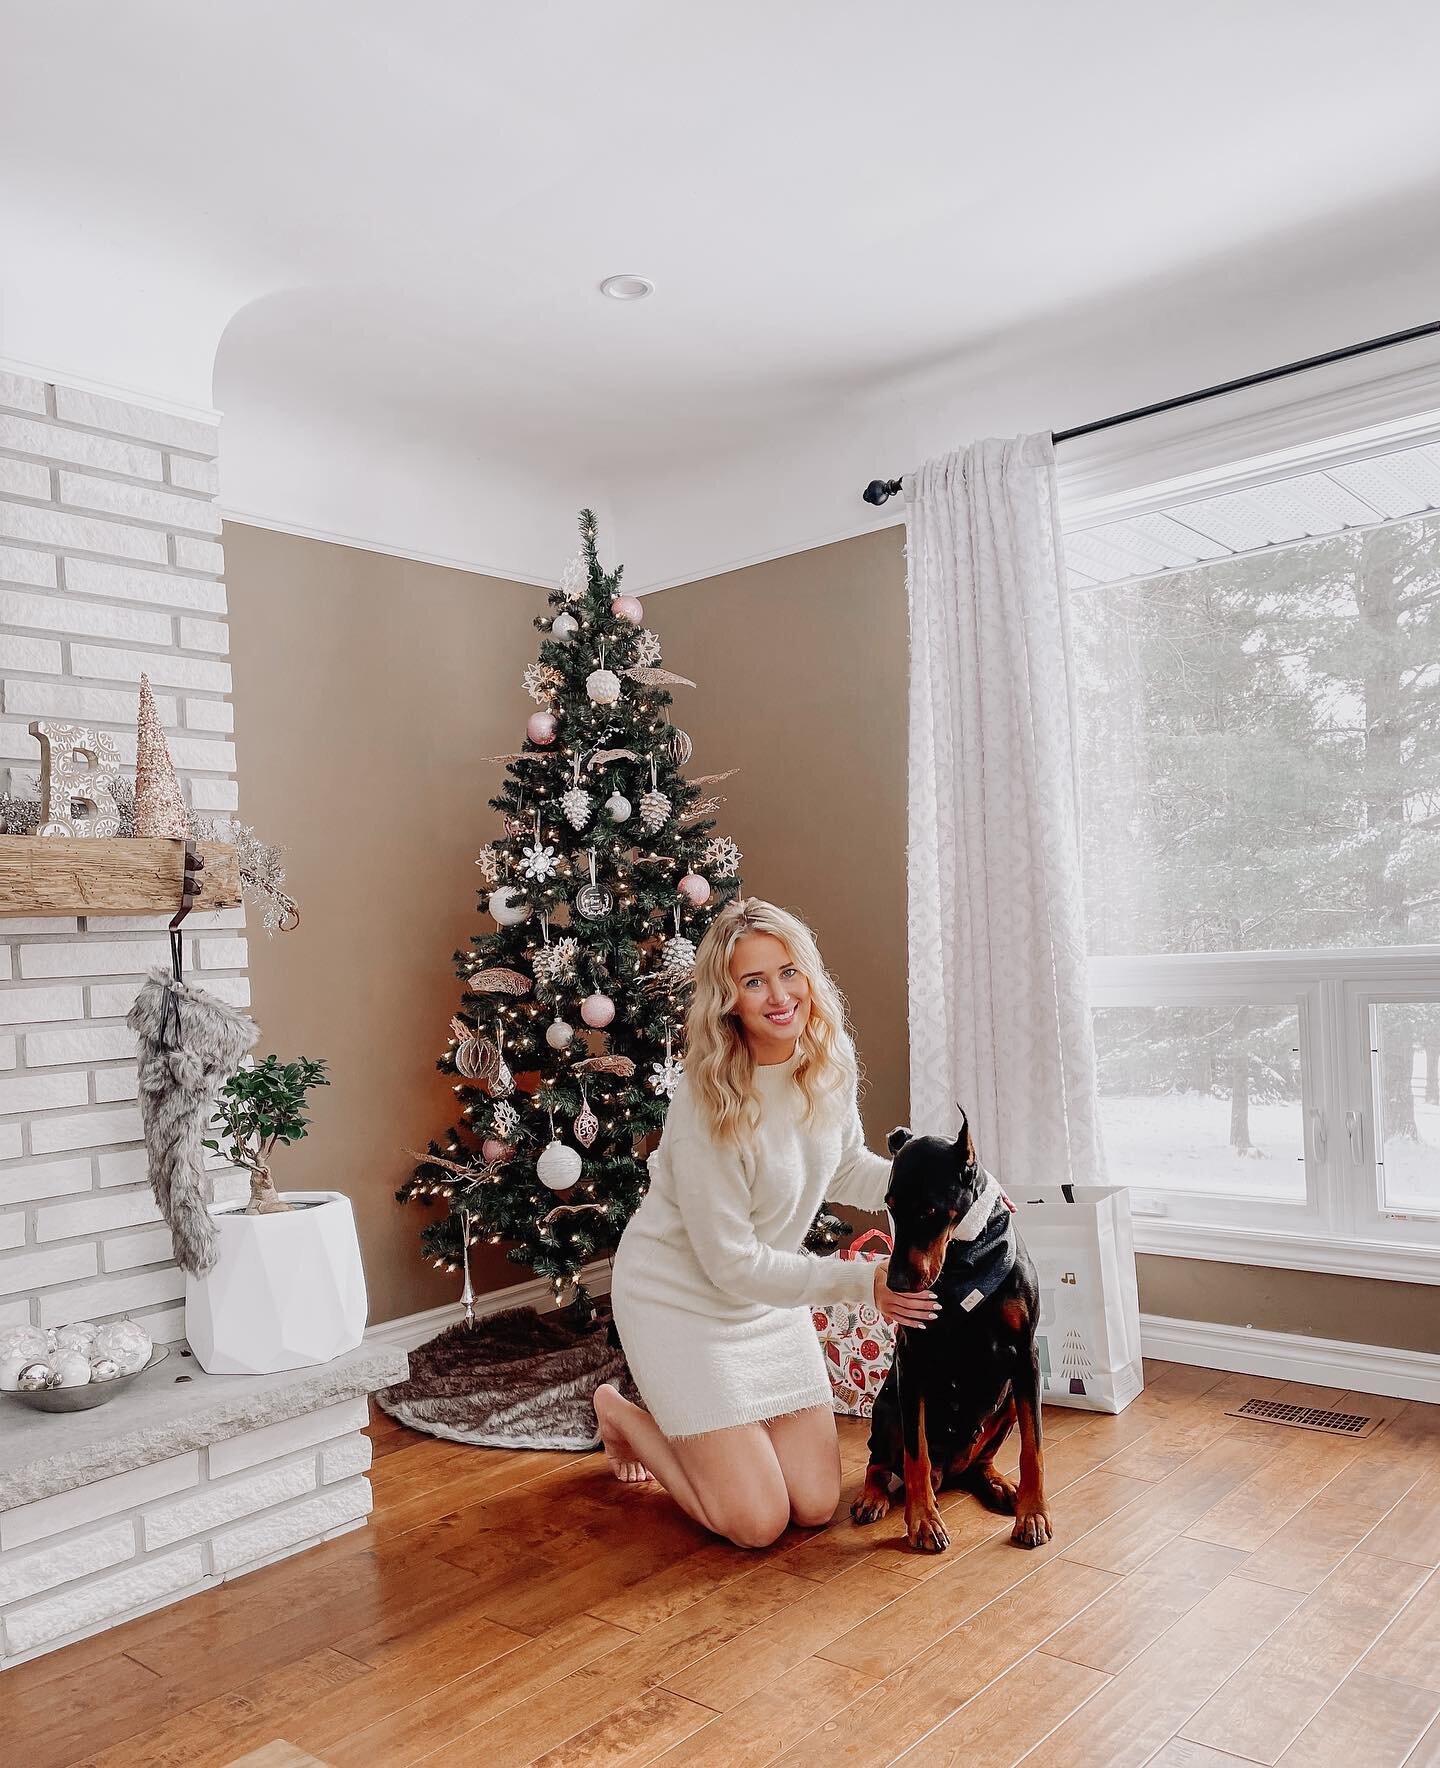 Merry Christmas!! ✨

We have been so blessed this crazy, crazy year. We planned a wedding in nine months, which meant Cocopups needed to slow down. I&rsquo;m excited to start regularly making again in the new year! 

Stay safe this holiday season and